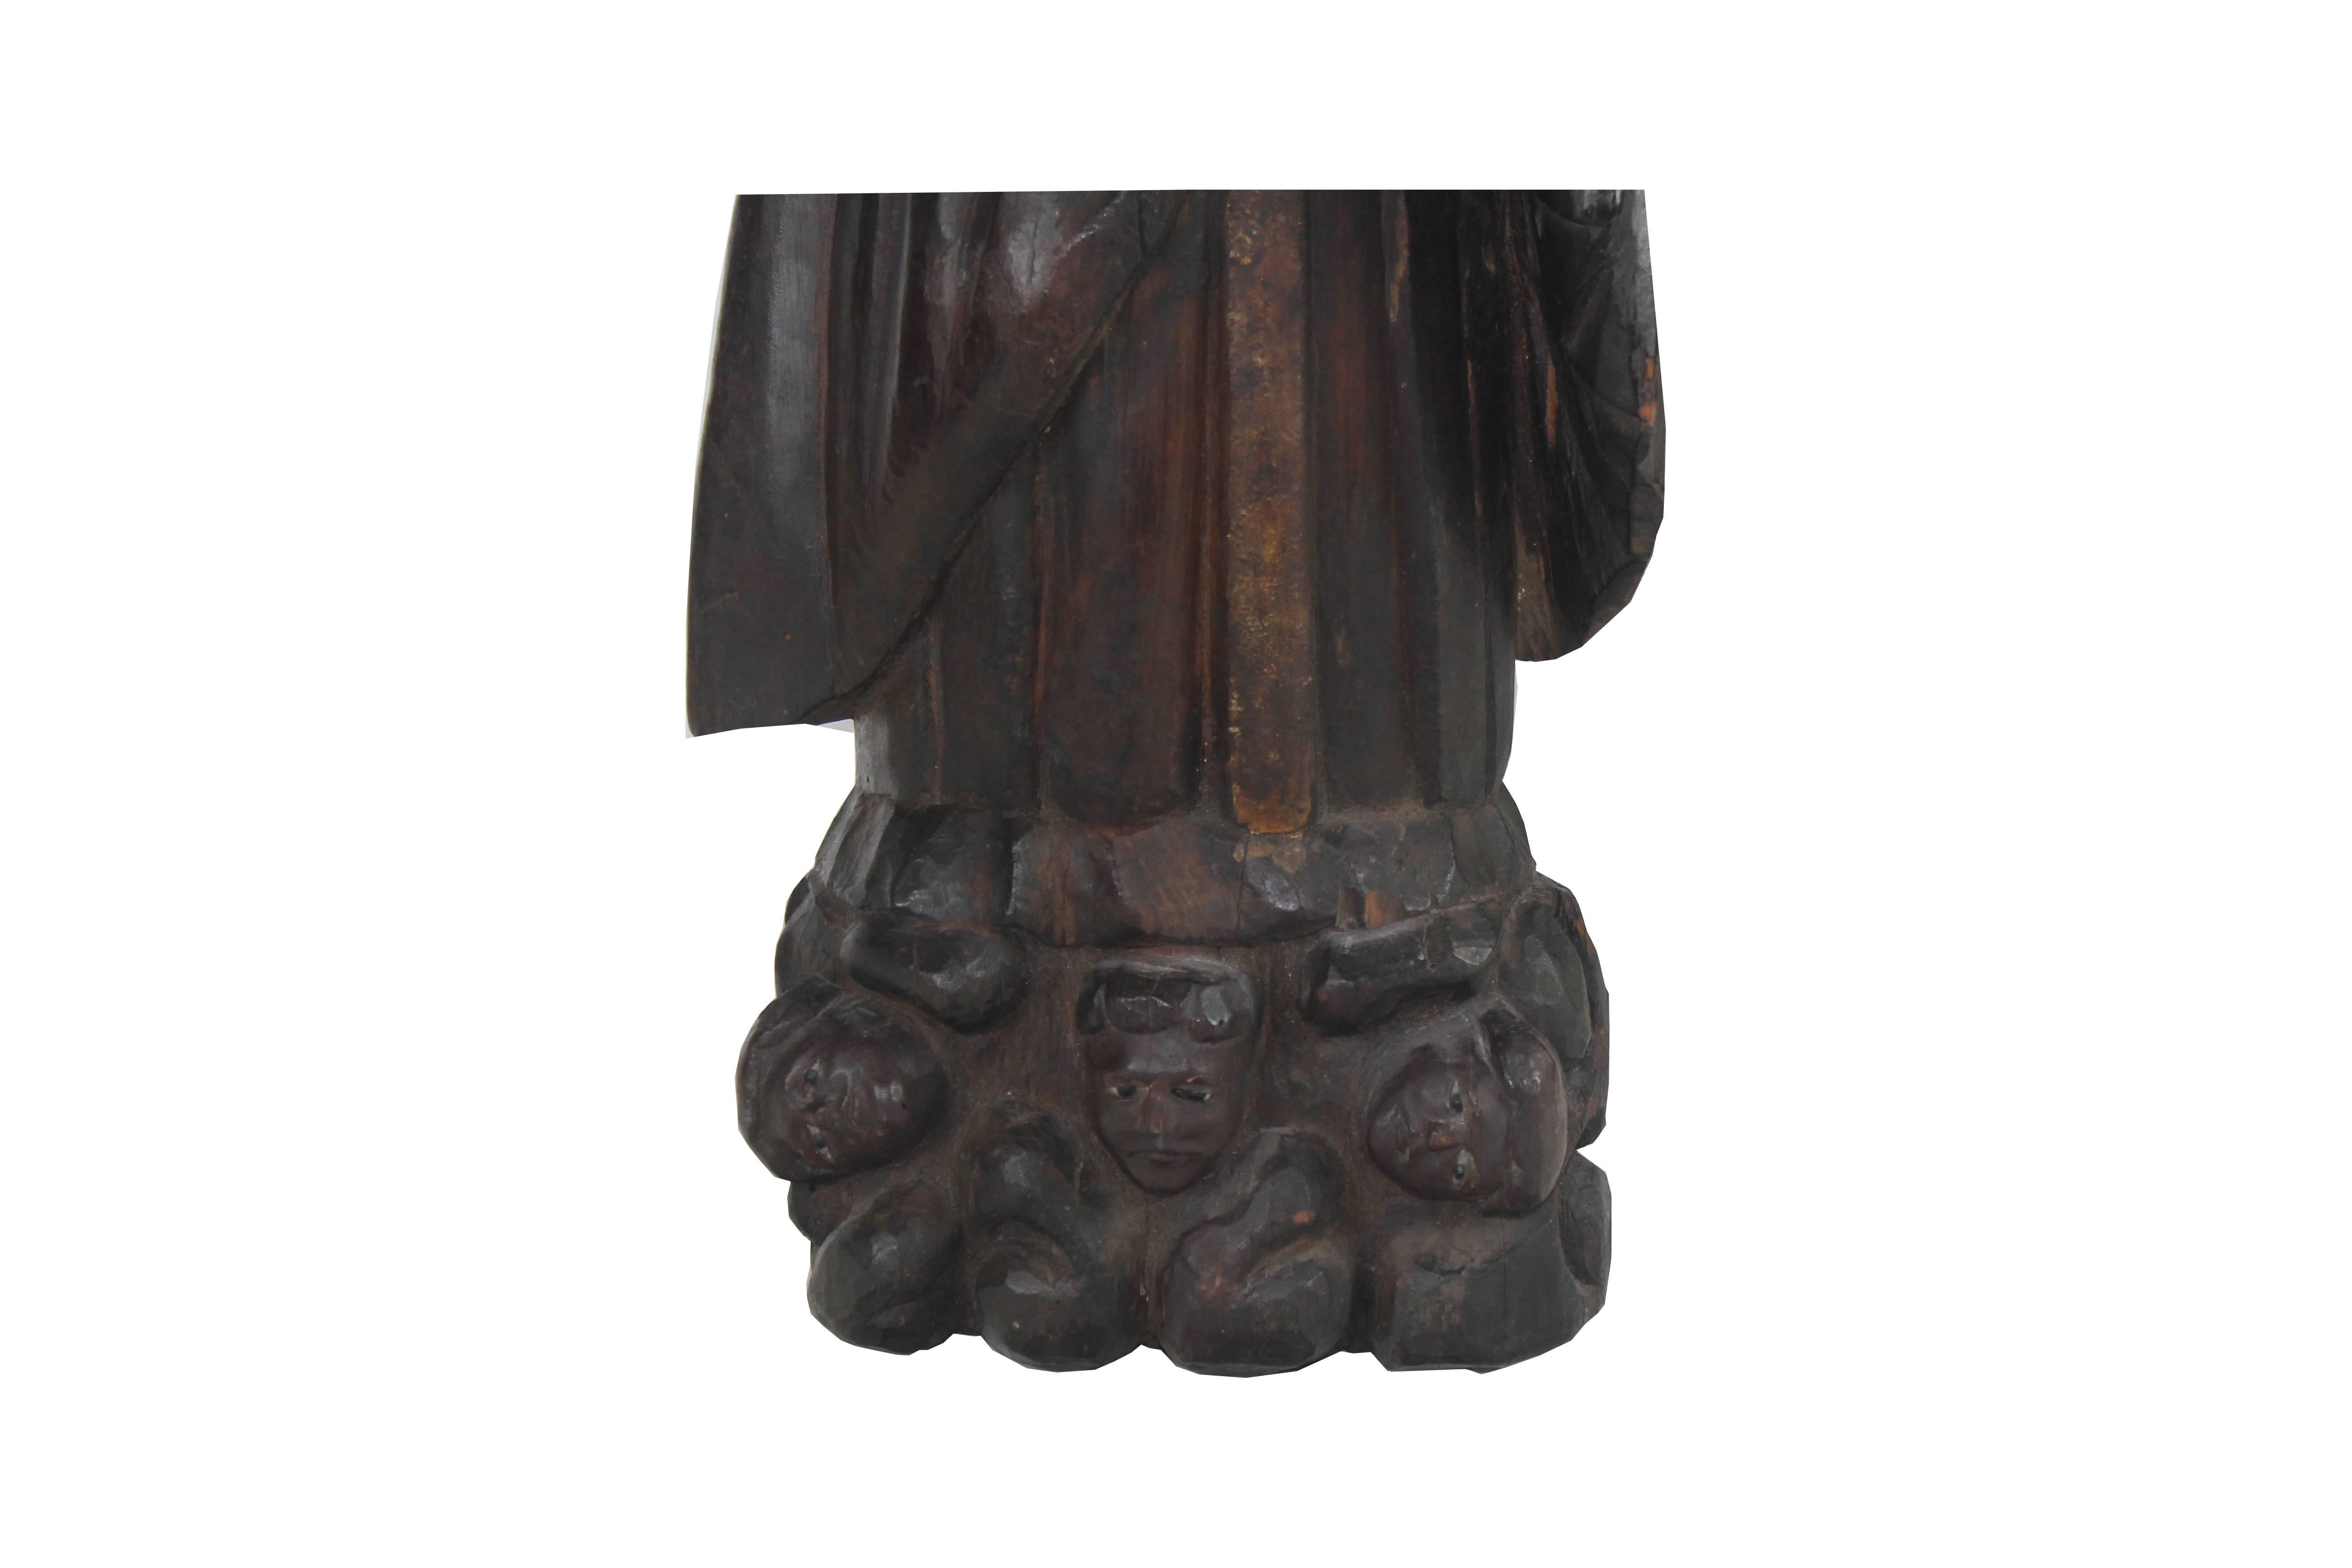 19th-century wood carved glass eyes Santos standing on a plinth with cherub heads.